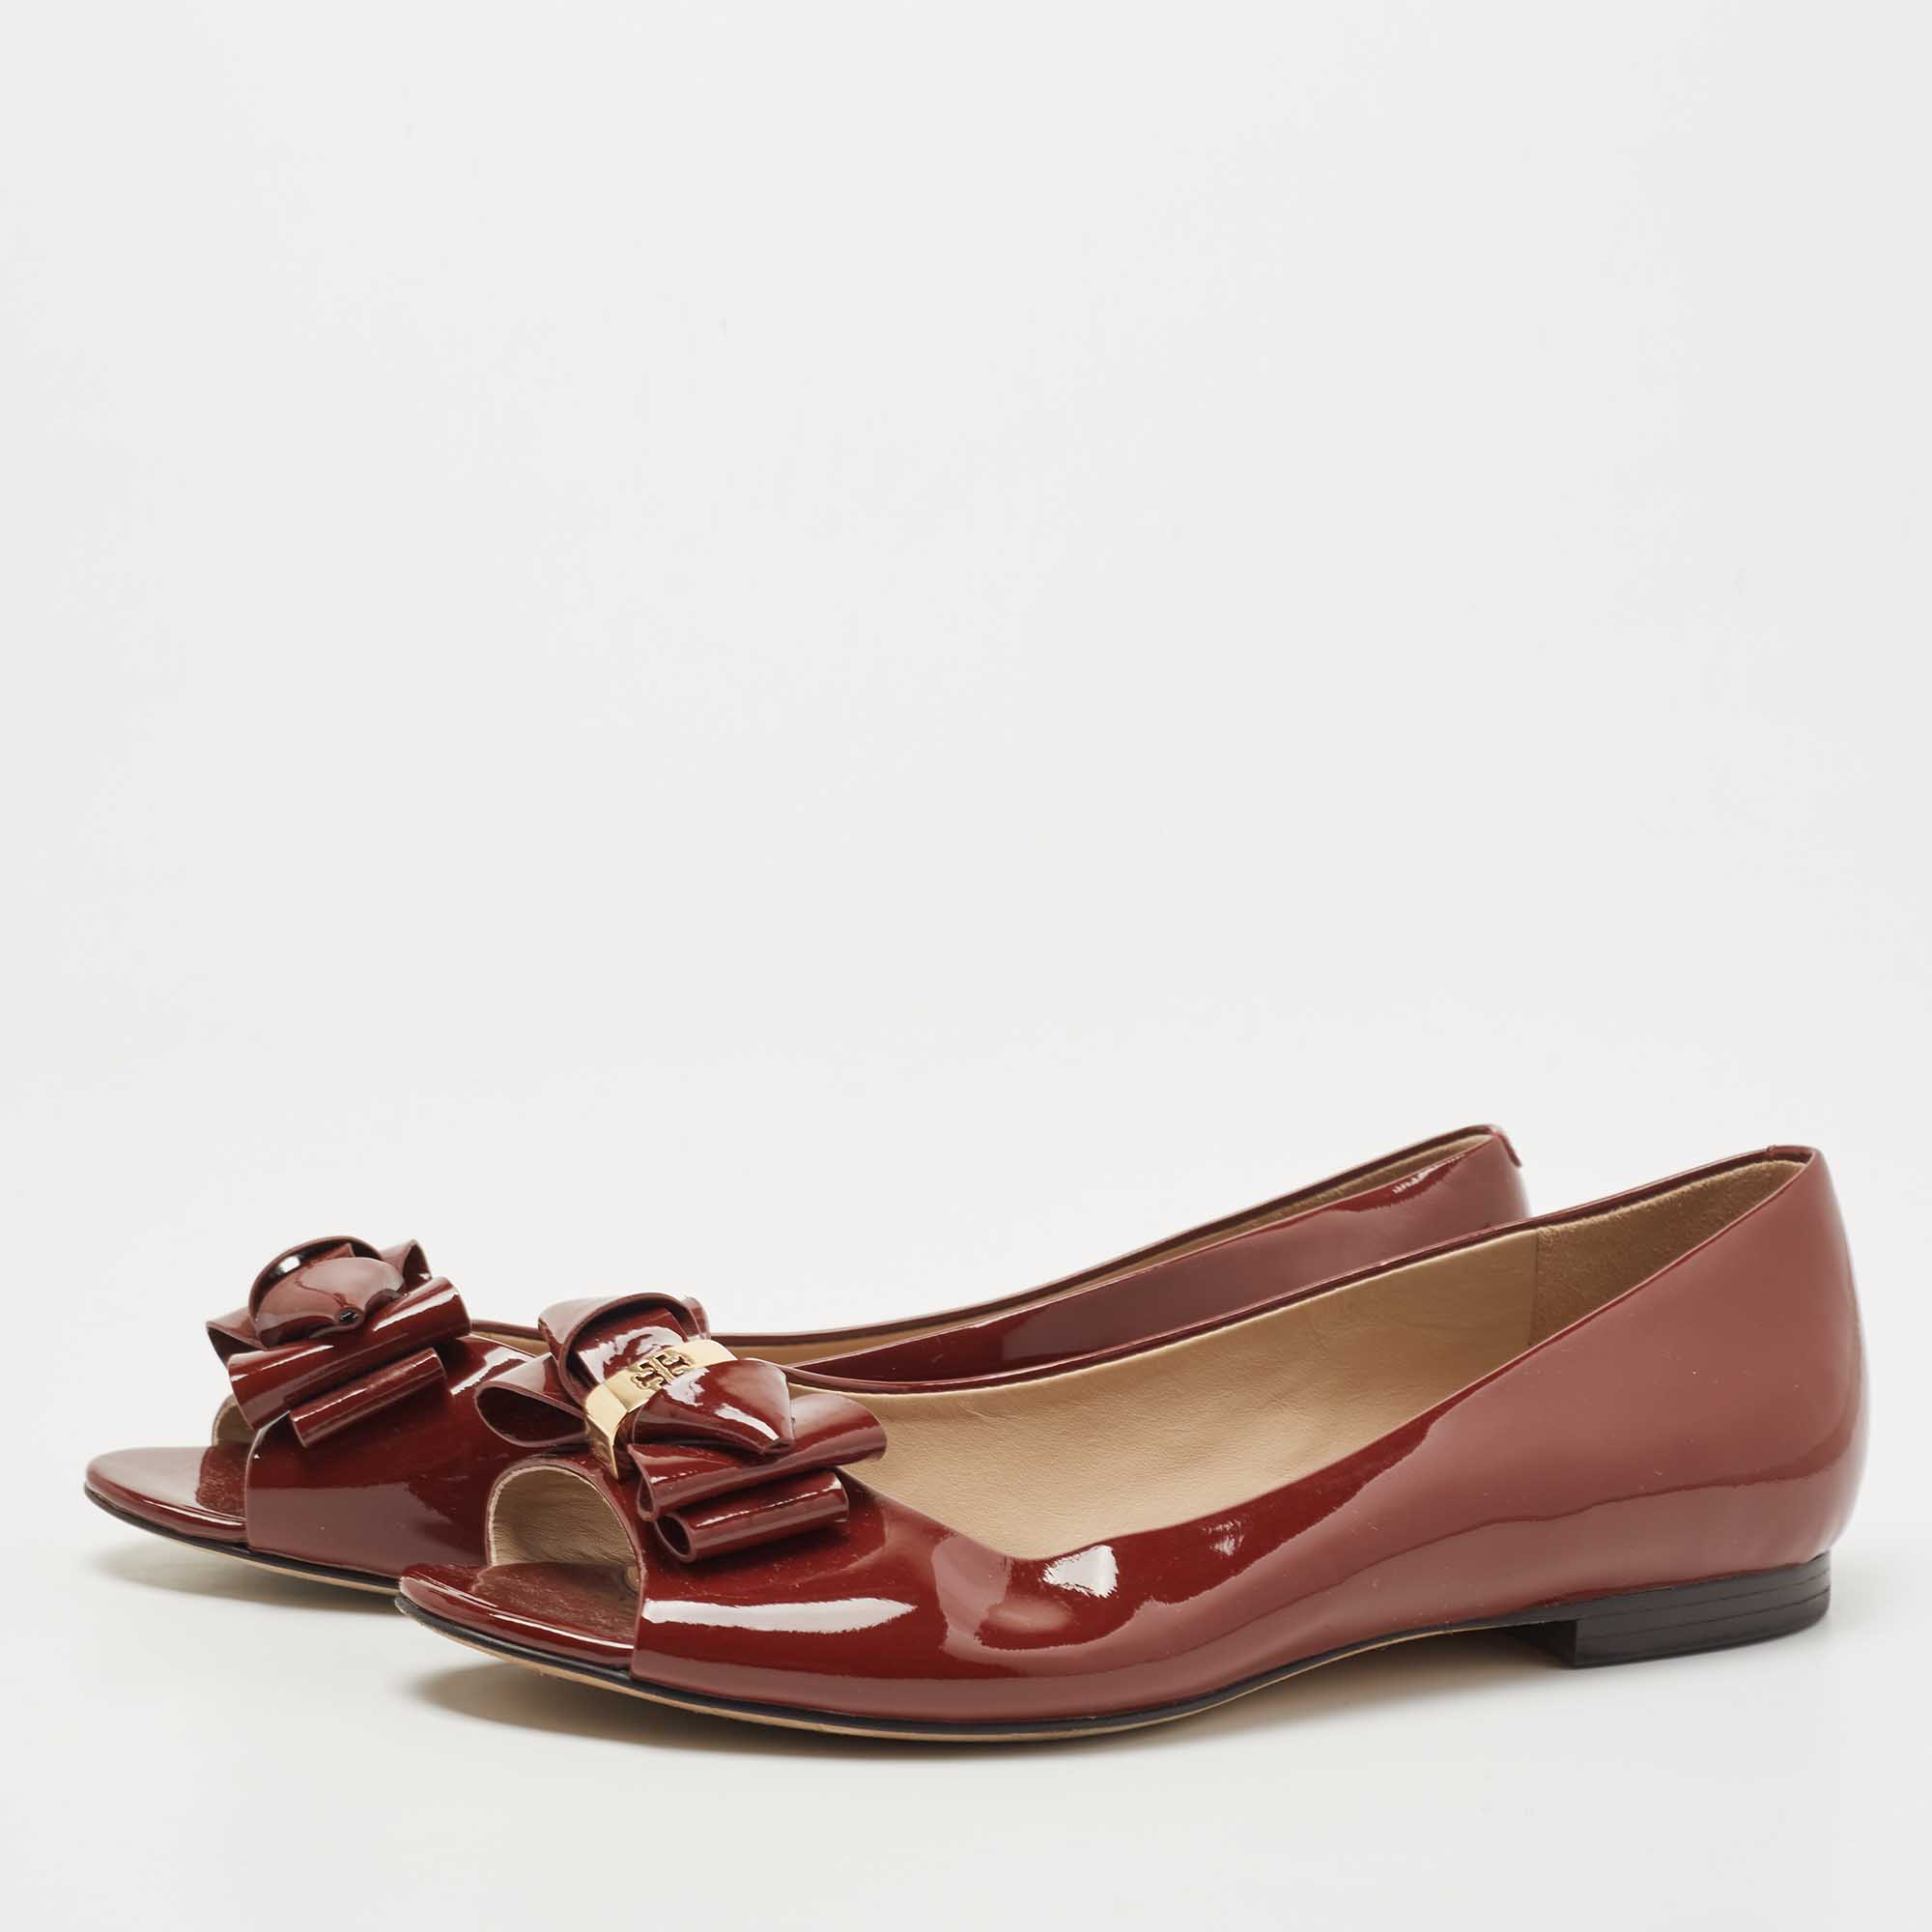 

Tory Burch Burgundy Patent Leather Bow Peep Toe Ballet Flats Size